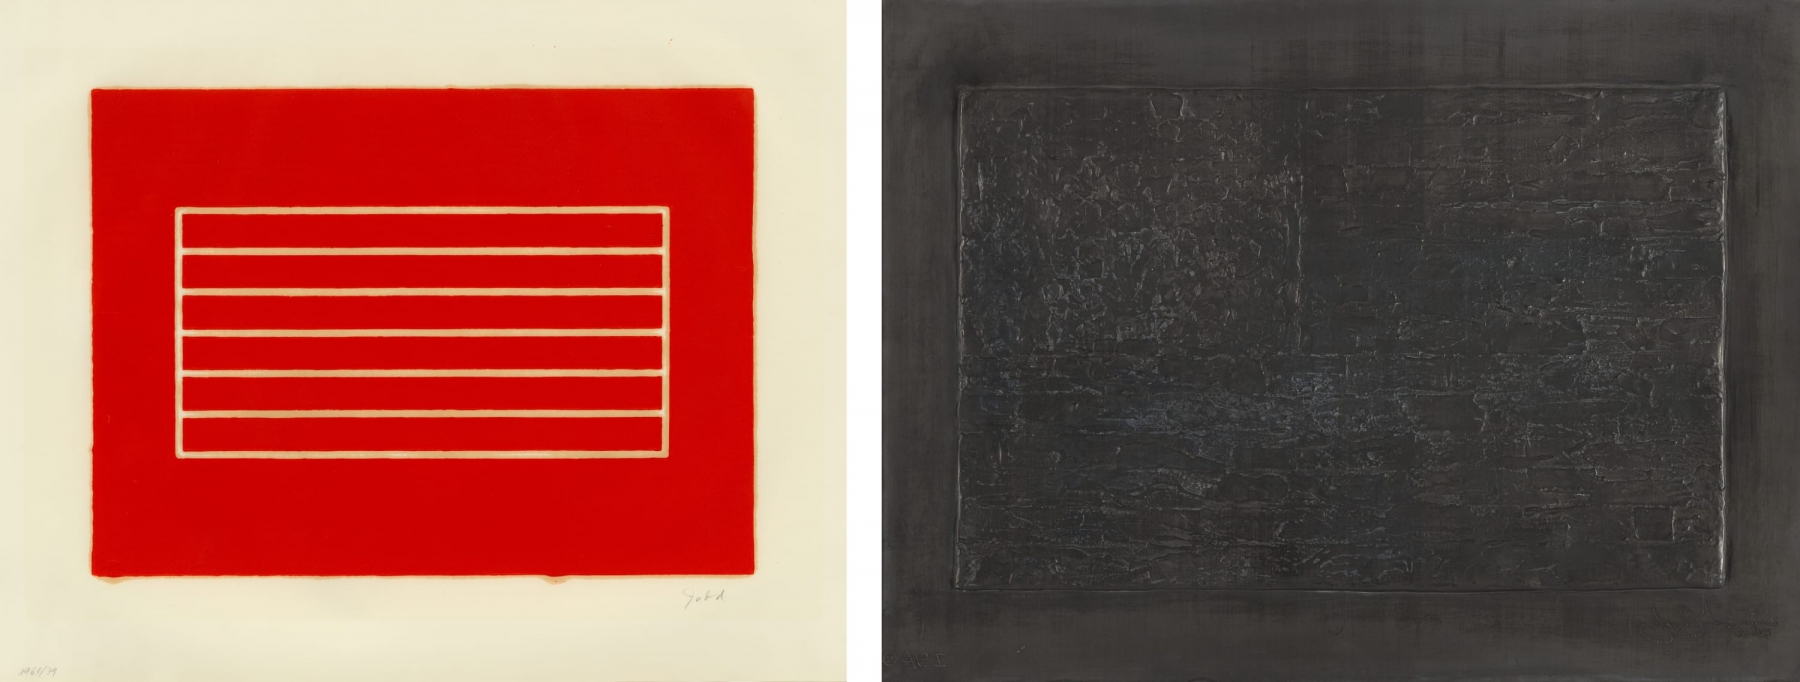 Left: Donald Judd,&nbsp;Untitled, 1961-79. Woodcut in cadmium red on offset paper,

15 x 20 1/4 inches, image; 21 1/2 x 29 3/4 inches, sheet.

Right: Jasper Johns,&nbsp;Flag, 1969. Lead relief,&nbsp;17 x 23 inches.